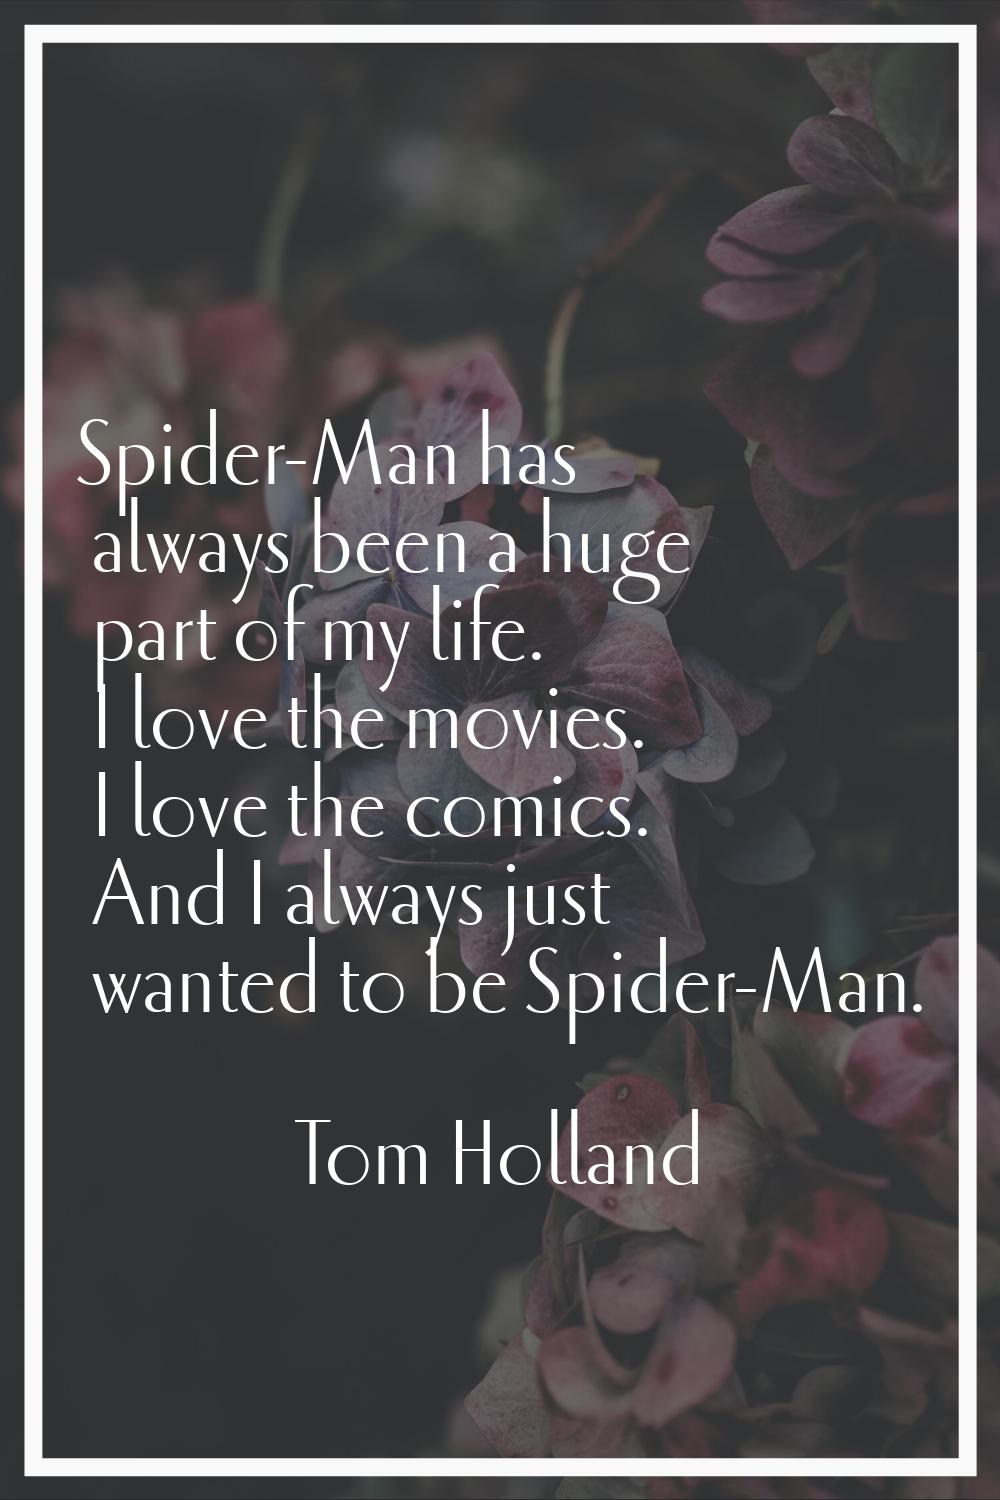 Spider-Man has always been a huge part of my life. I love the movies. I love the comics. And I alwa